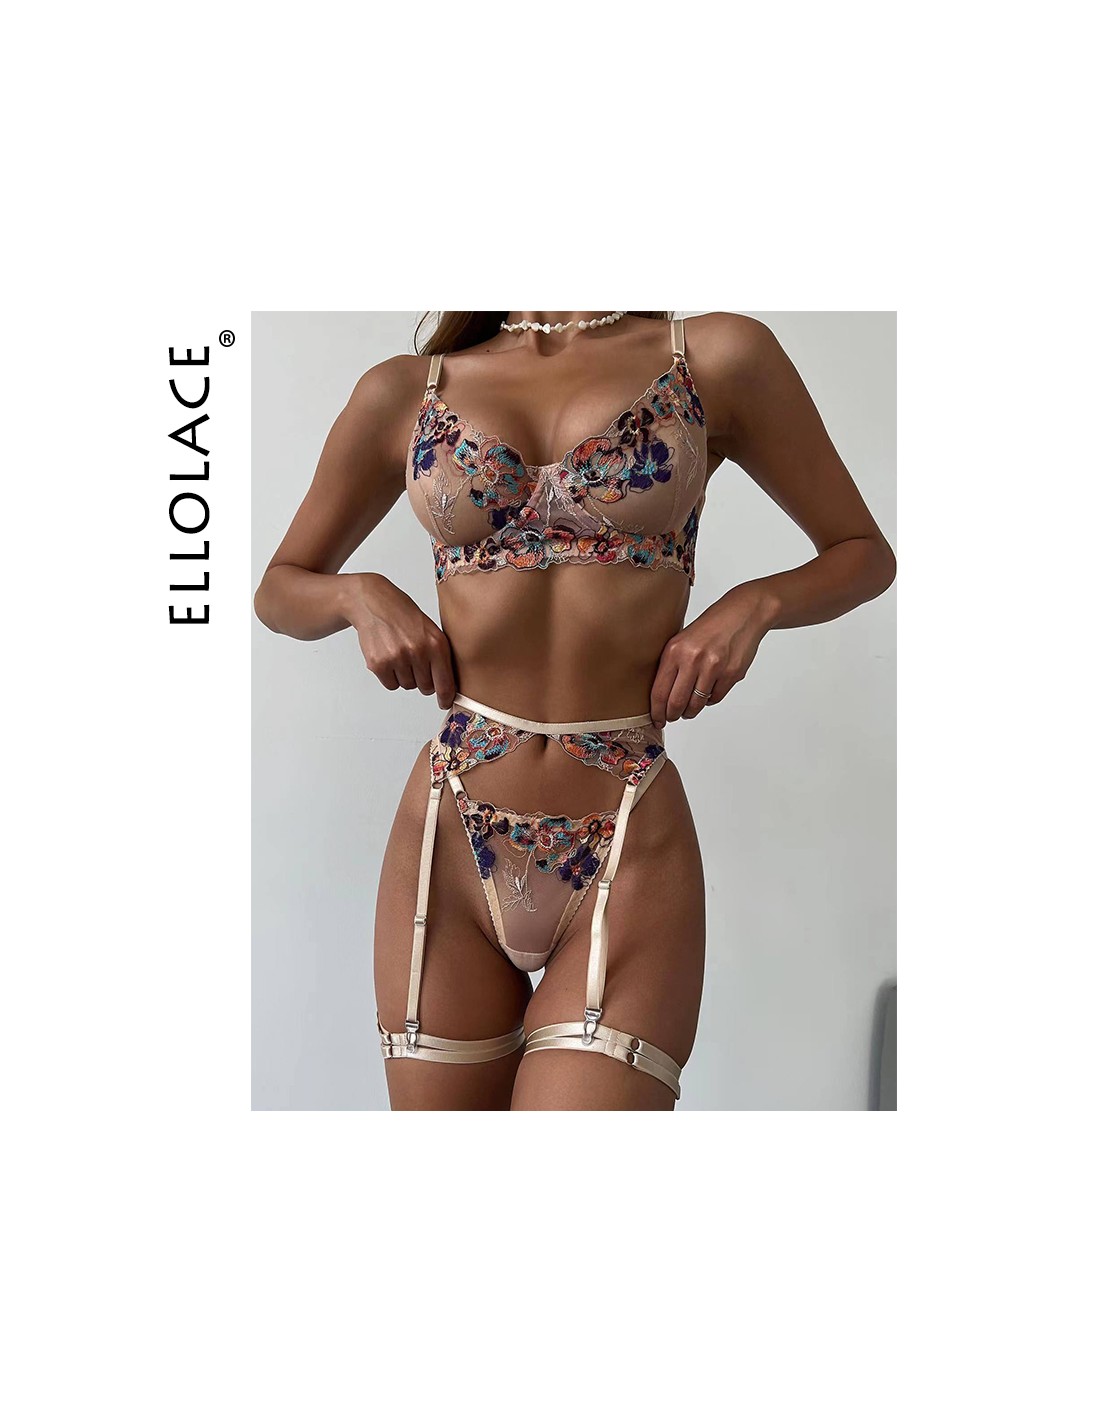 Ellolace Floral Transparent Fancy Lingerie Lace Sexy Sensual Push Up  Underwear Set Underwire Bra Garters Thongs Sex Intimate Q0705 From  Sihuai03, $10.47